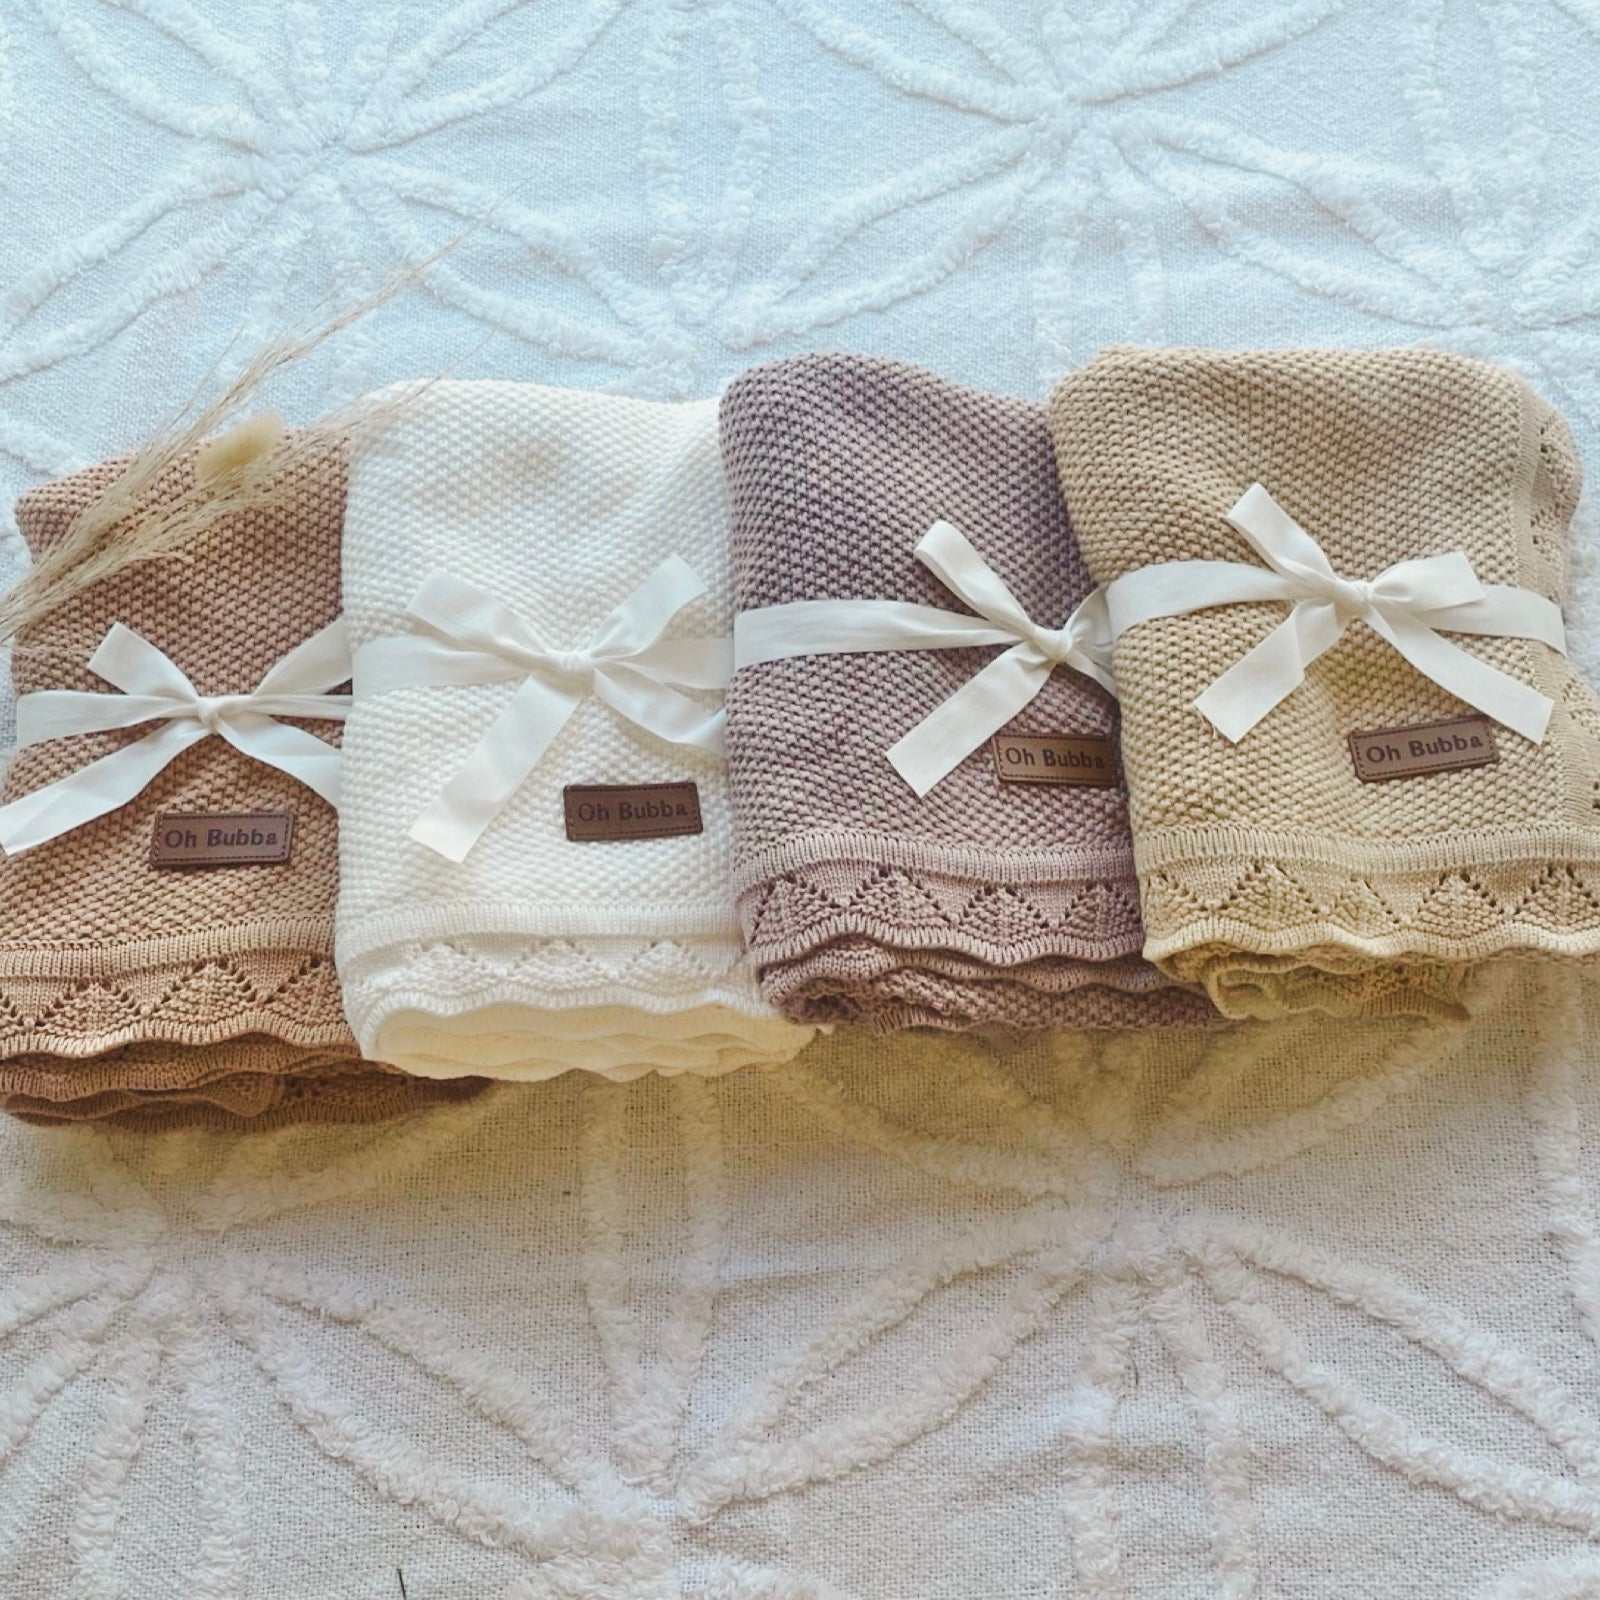 Baby Knit blankets. Dusty Rose, White, Mauve, Caramel baby blankets